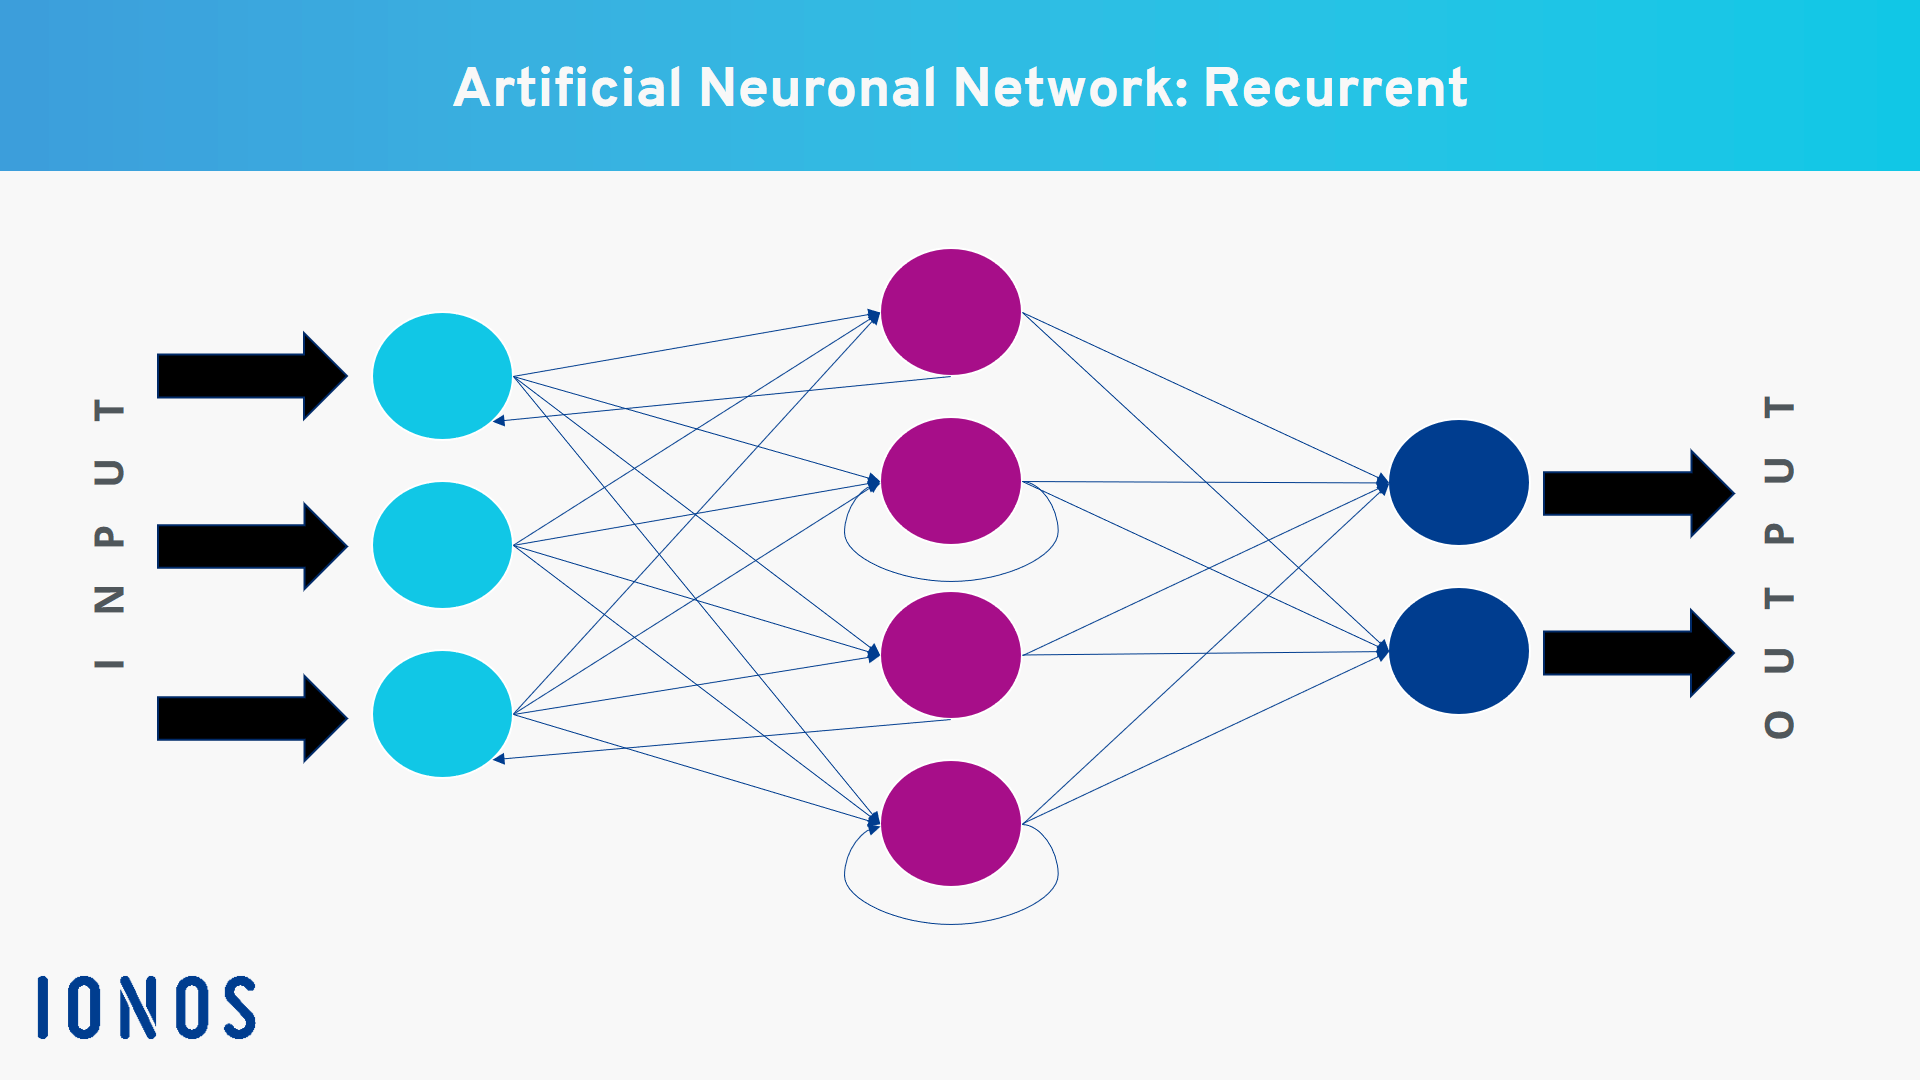 Example of an artificial neural network with recurrent looping